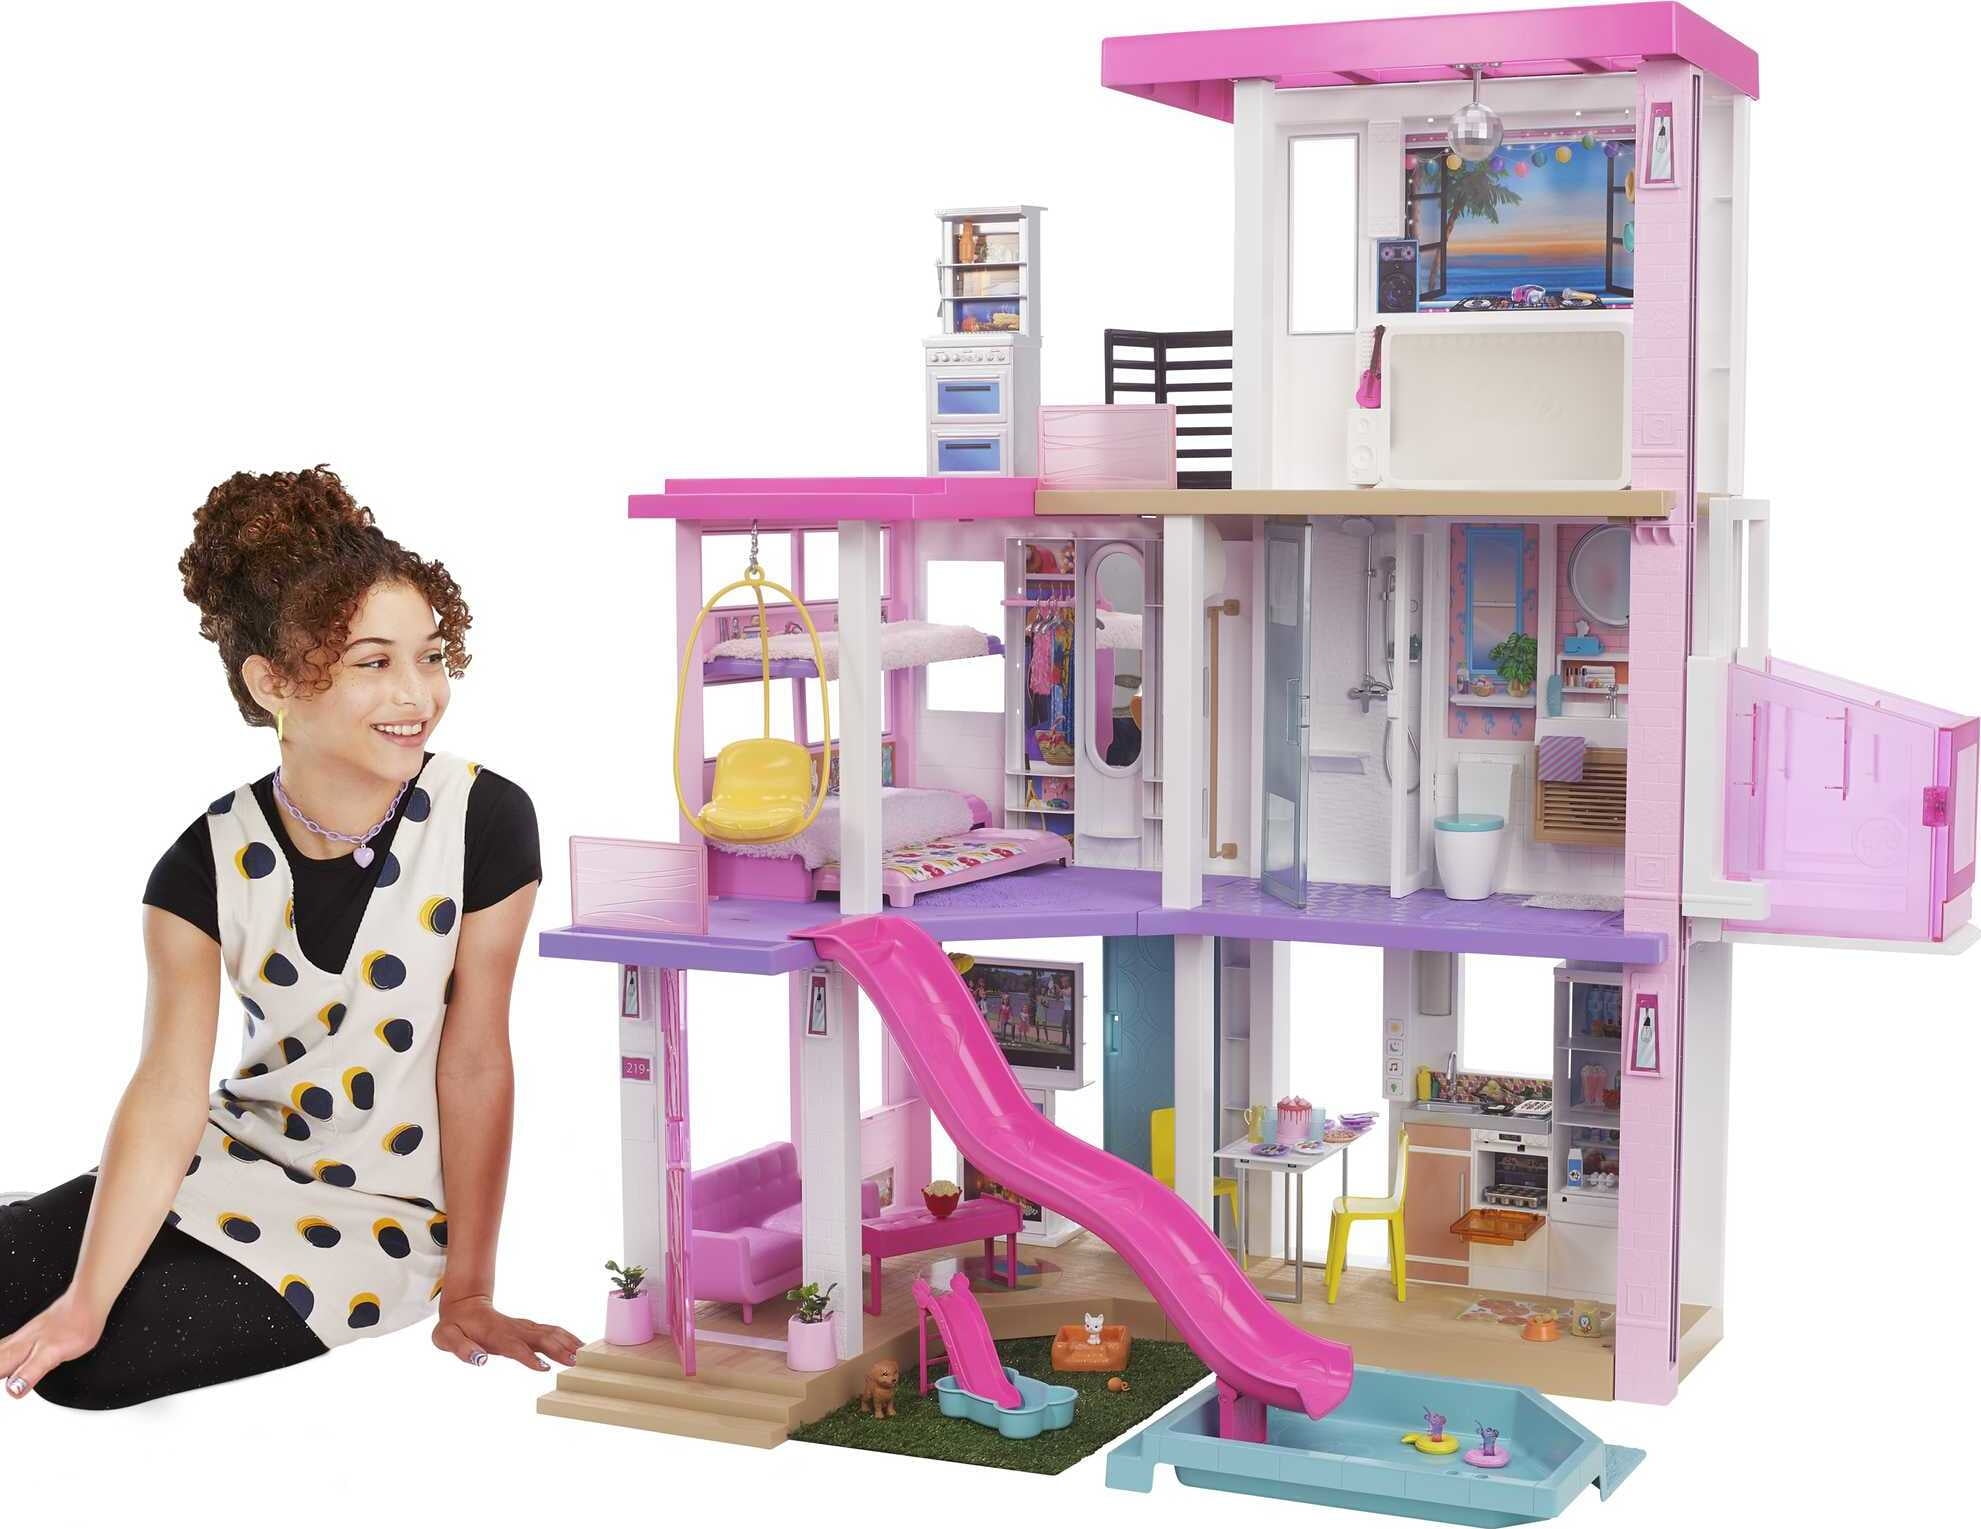 Barbie DreamHouse Playset with 10 Play Areas, 75+ Furniture & Accessories, Lights & Sounds